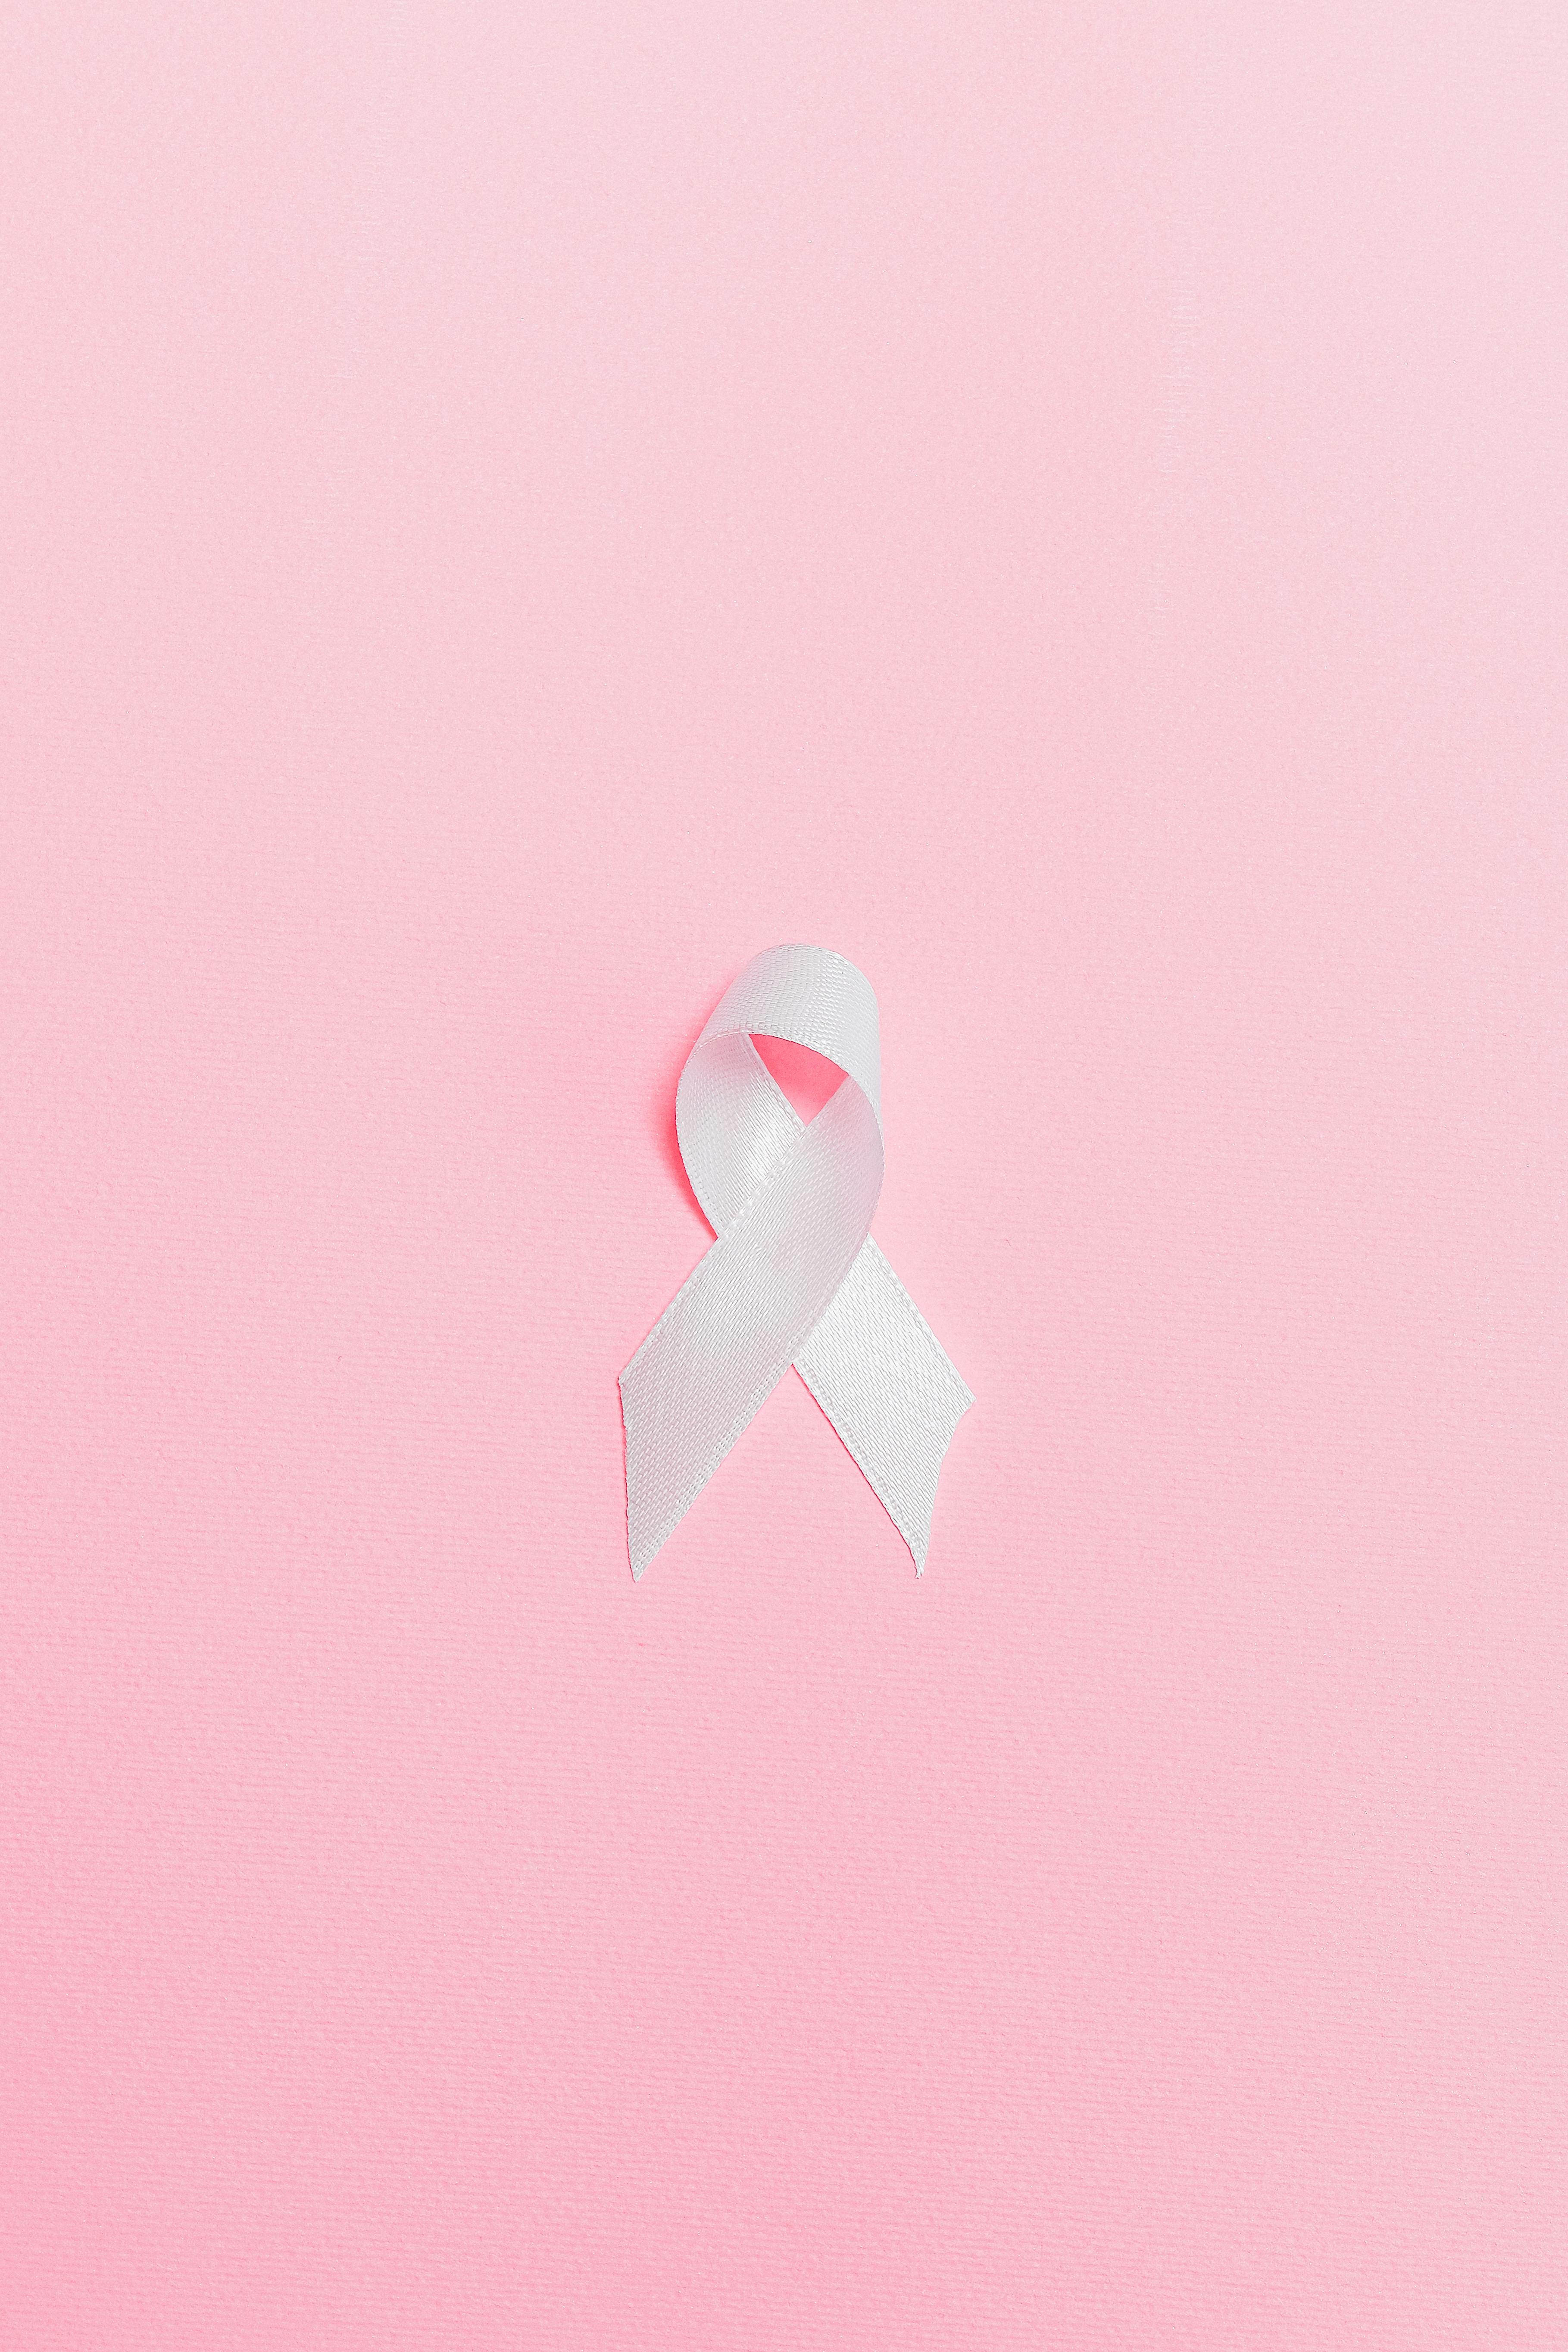 14321 Breast cancer ribbon Vector Images  Depositphotos